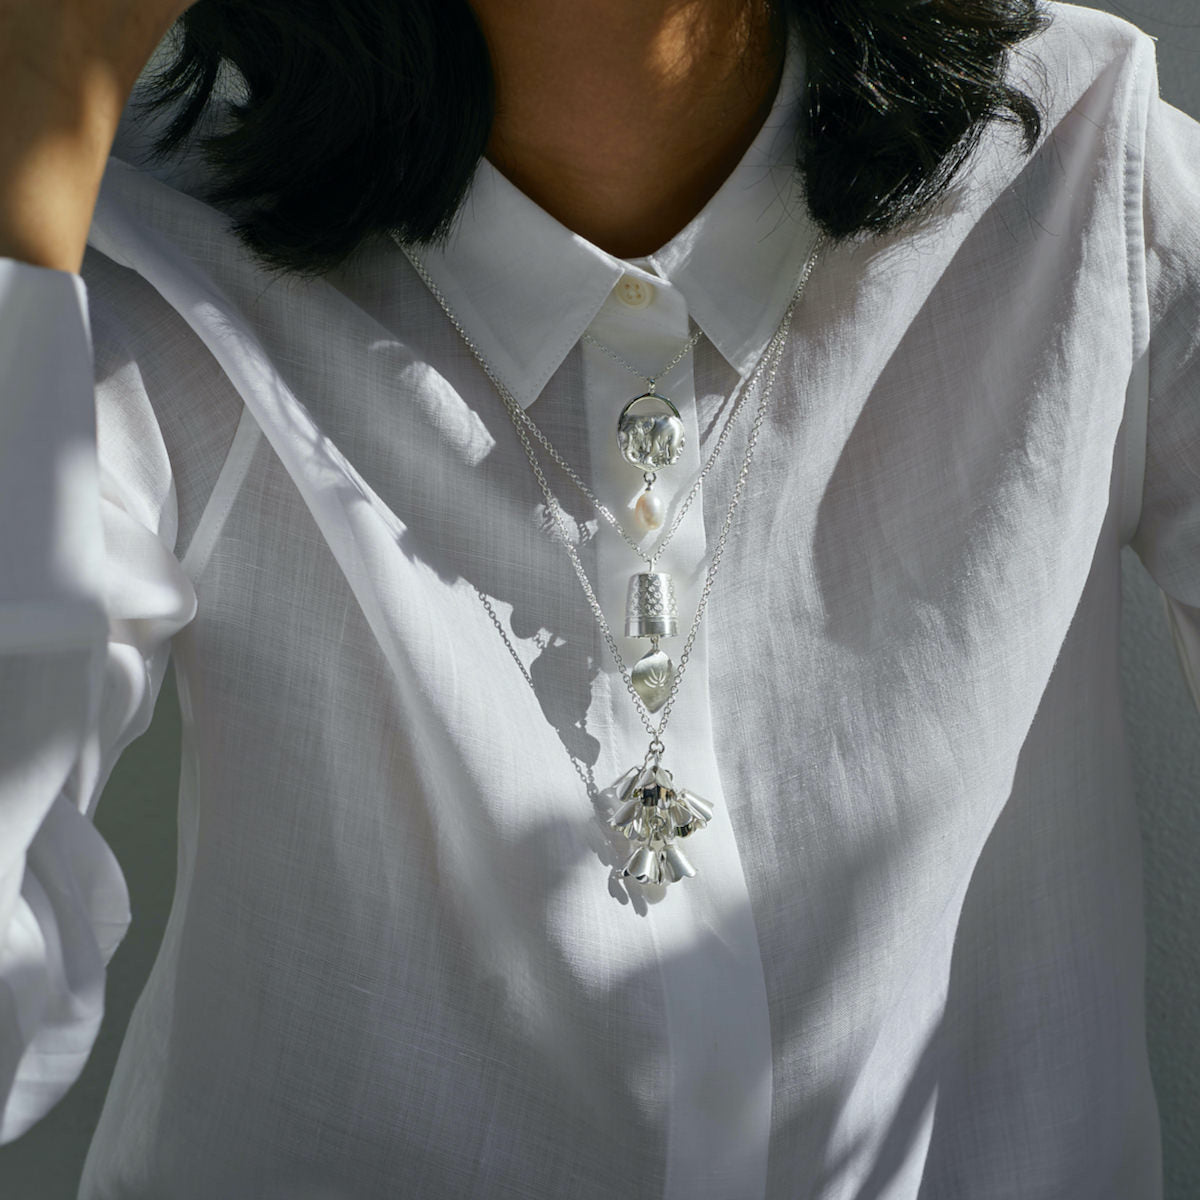 Brave Edith Precious and Padauk silver necklaces worn layered over a white shirt